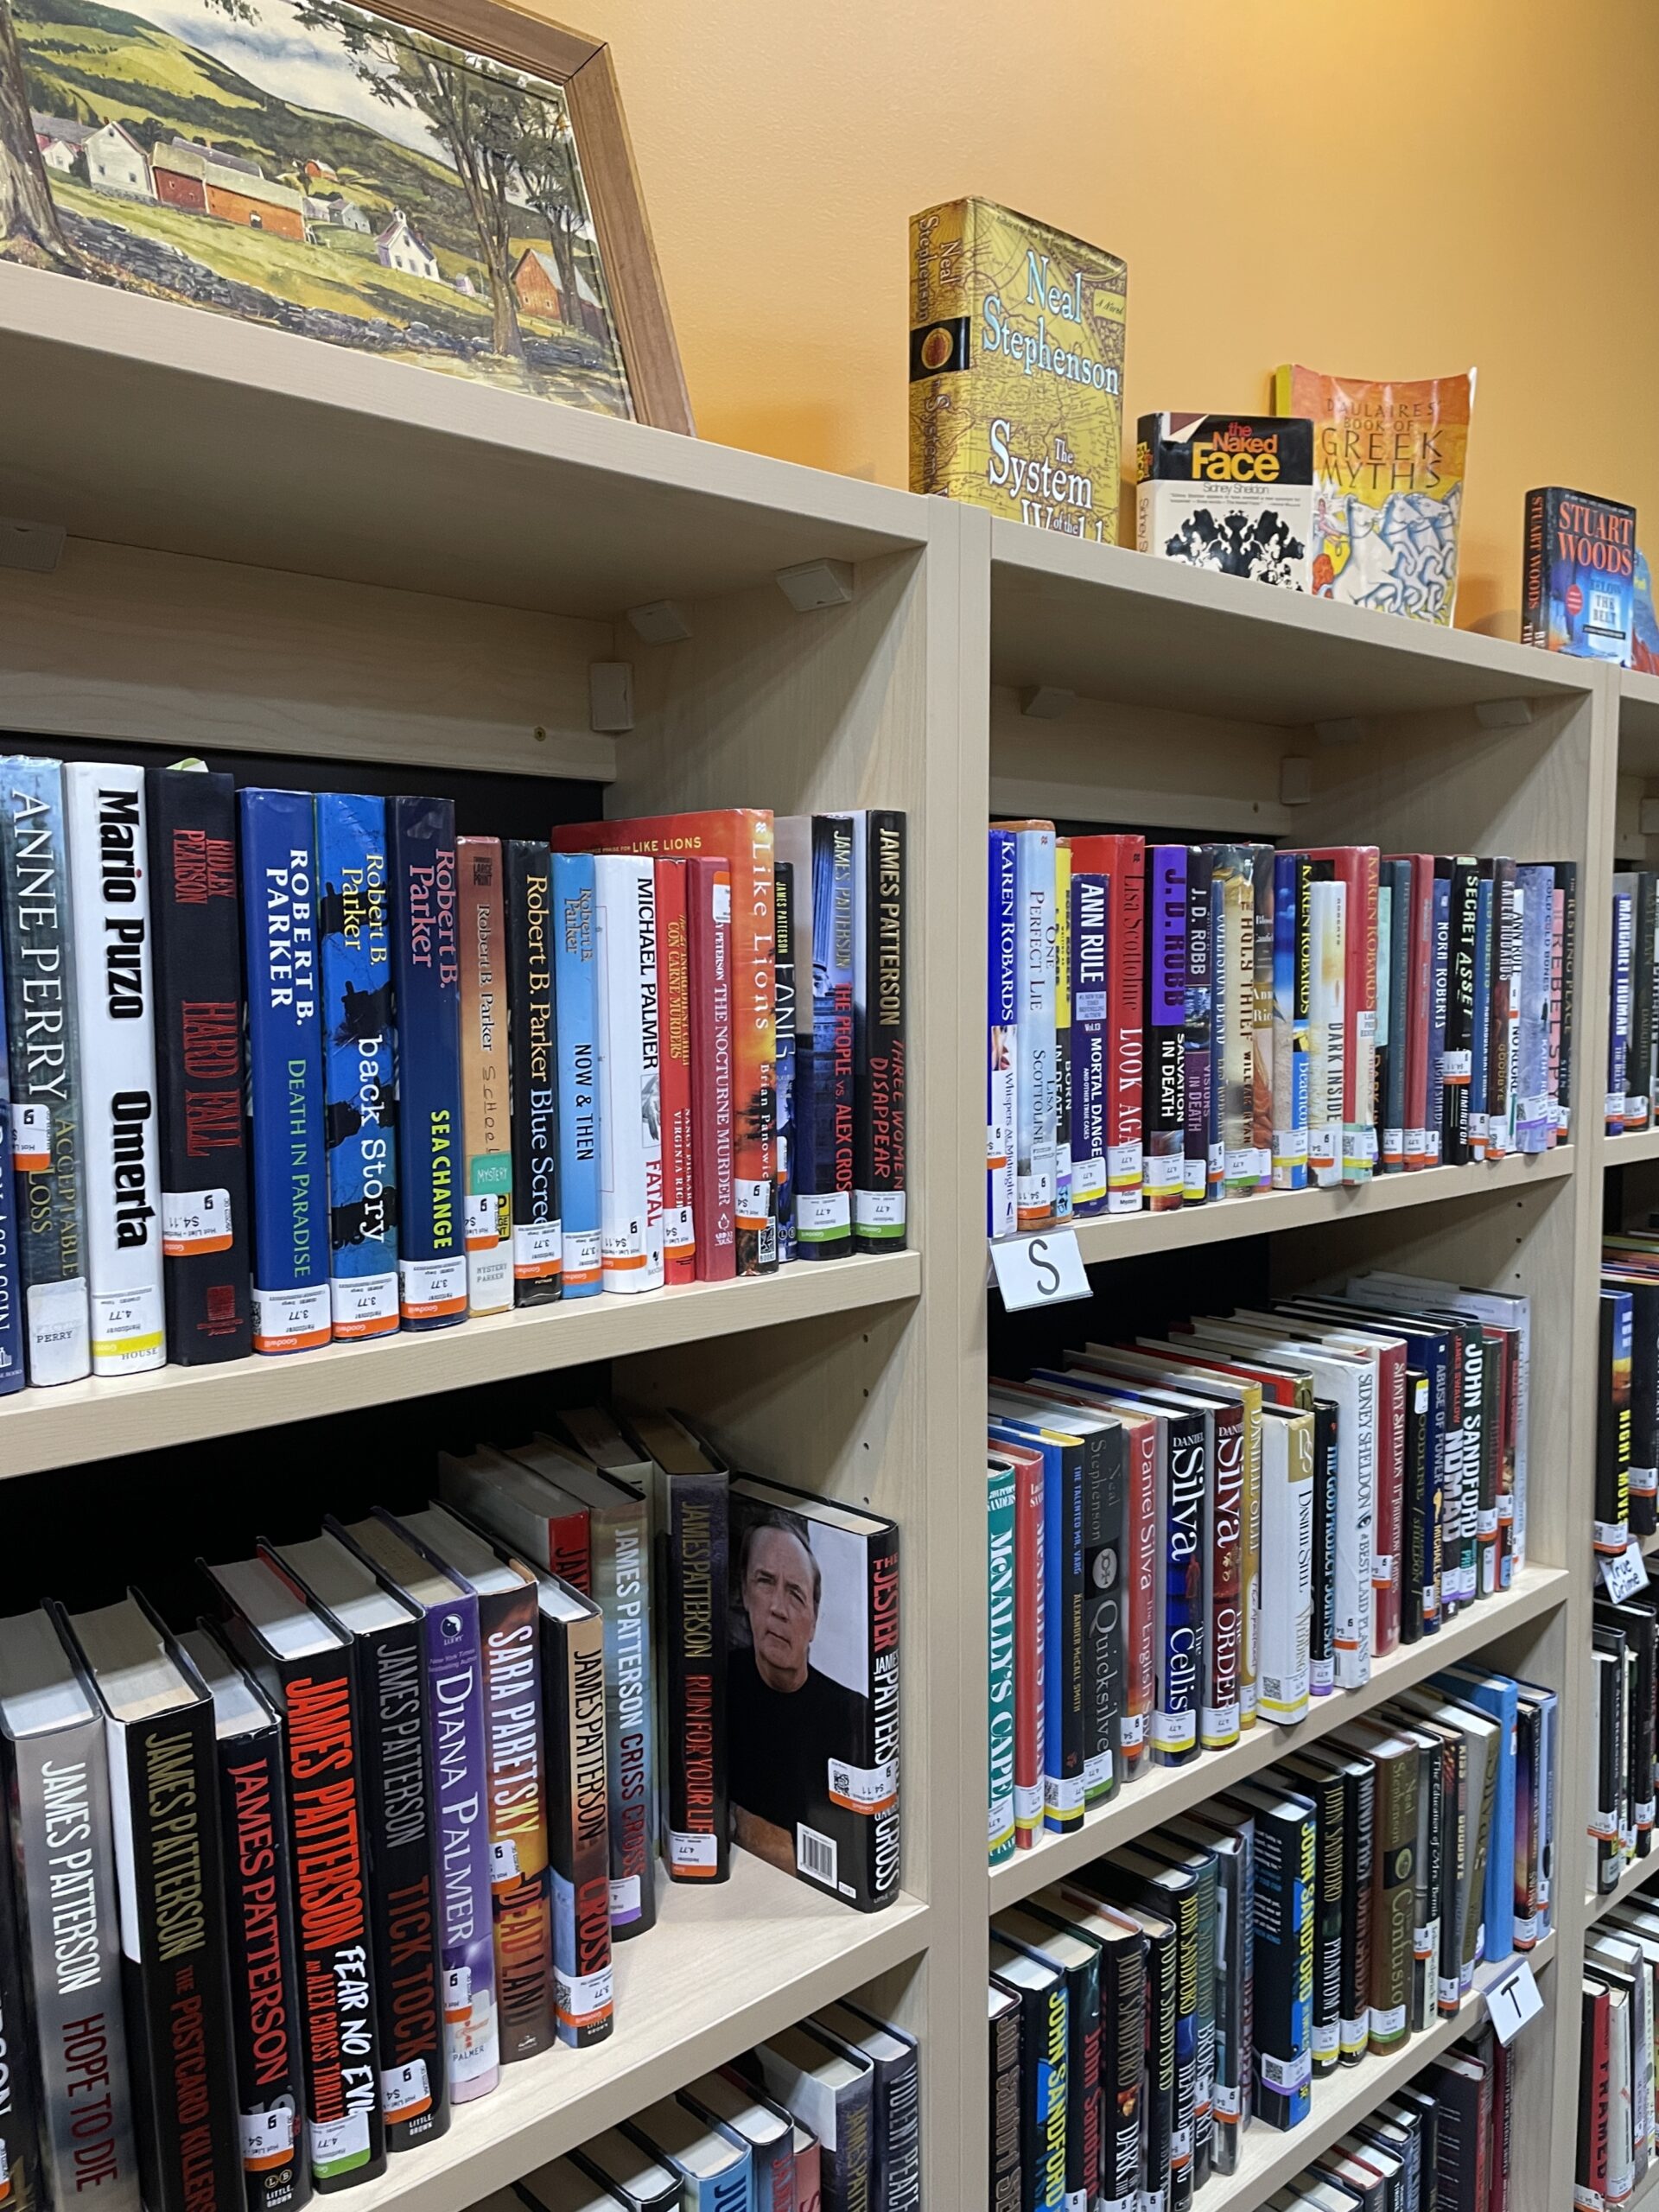 5 reasons to shop at the Goodwill Bookstore and Donation Center